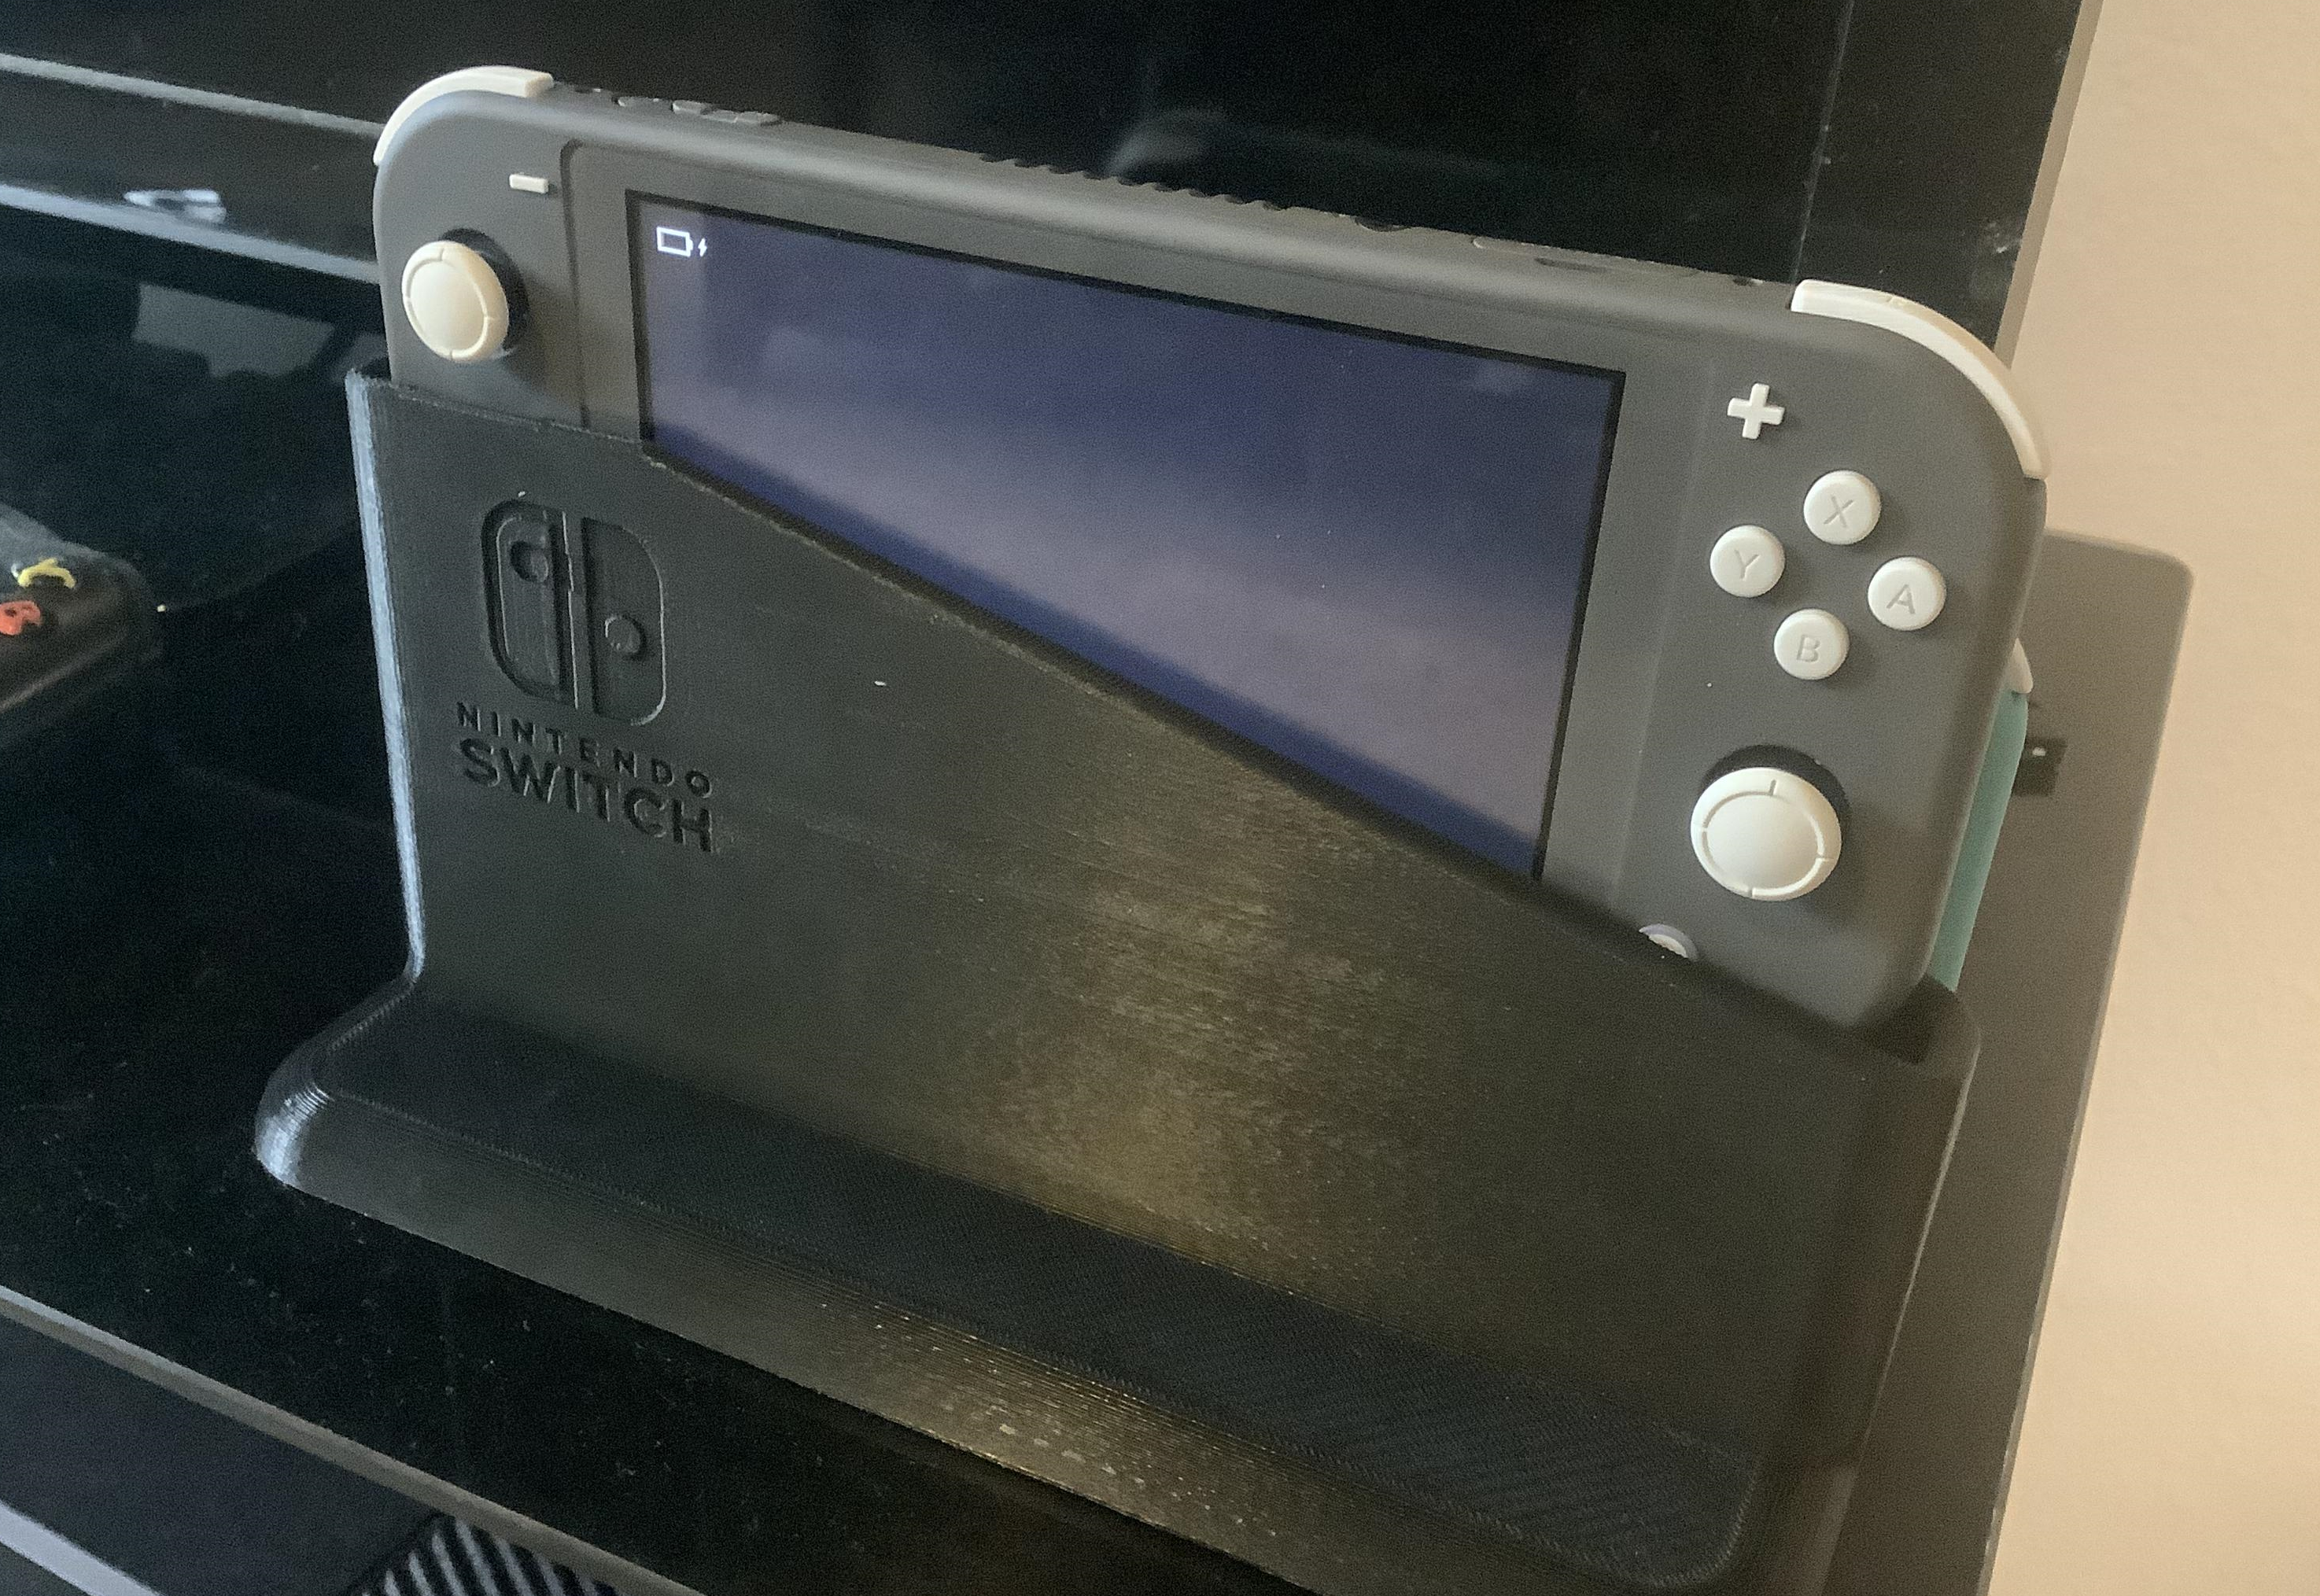 can i dock a switch lite